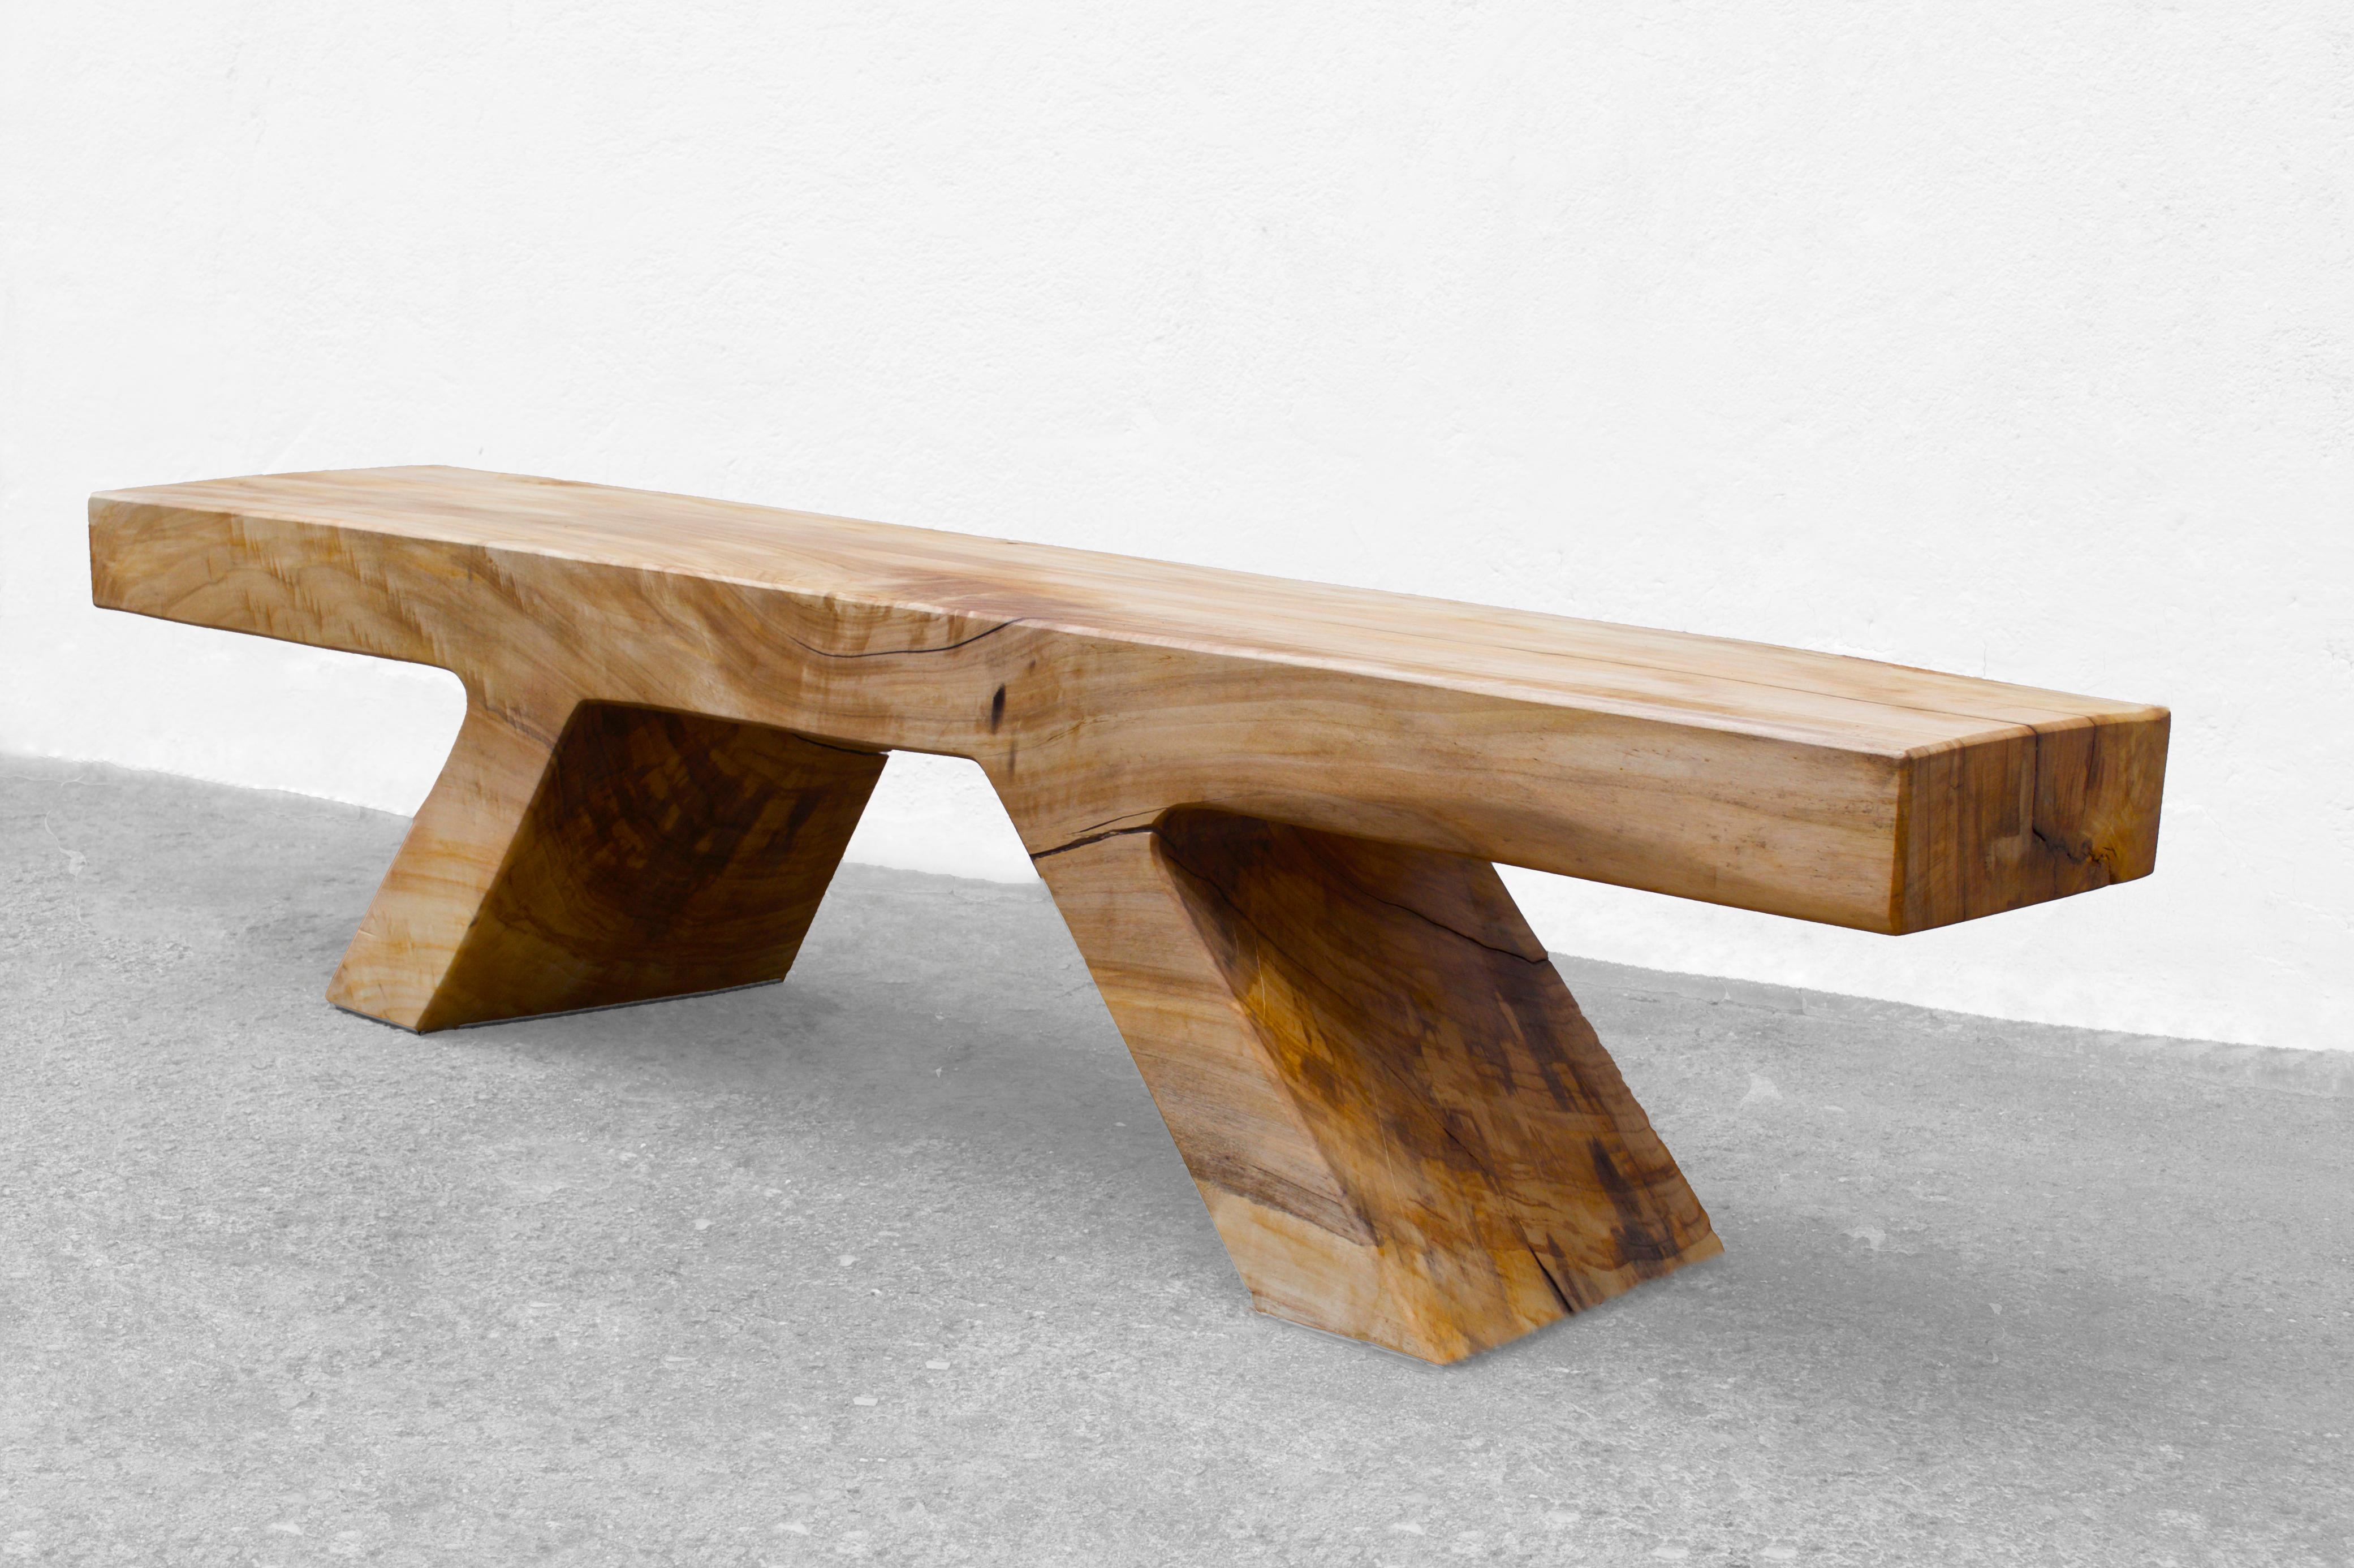 Unique Poplar bench sculpted by Jörg Pietschmann
Materials: Polished Poplar, oil finish
Dimensions: H 43 x W 183 x D 39 cm

In Pietschmann’s sculptures, trees that for centuries were part of a landscape and founded in primordial forces tell